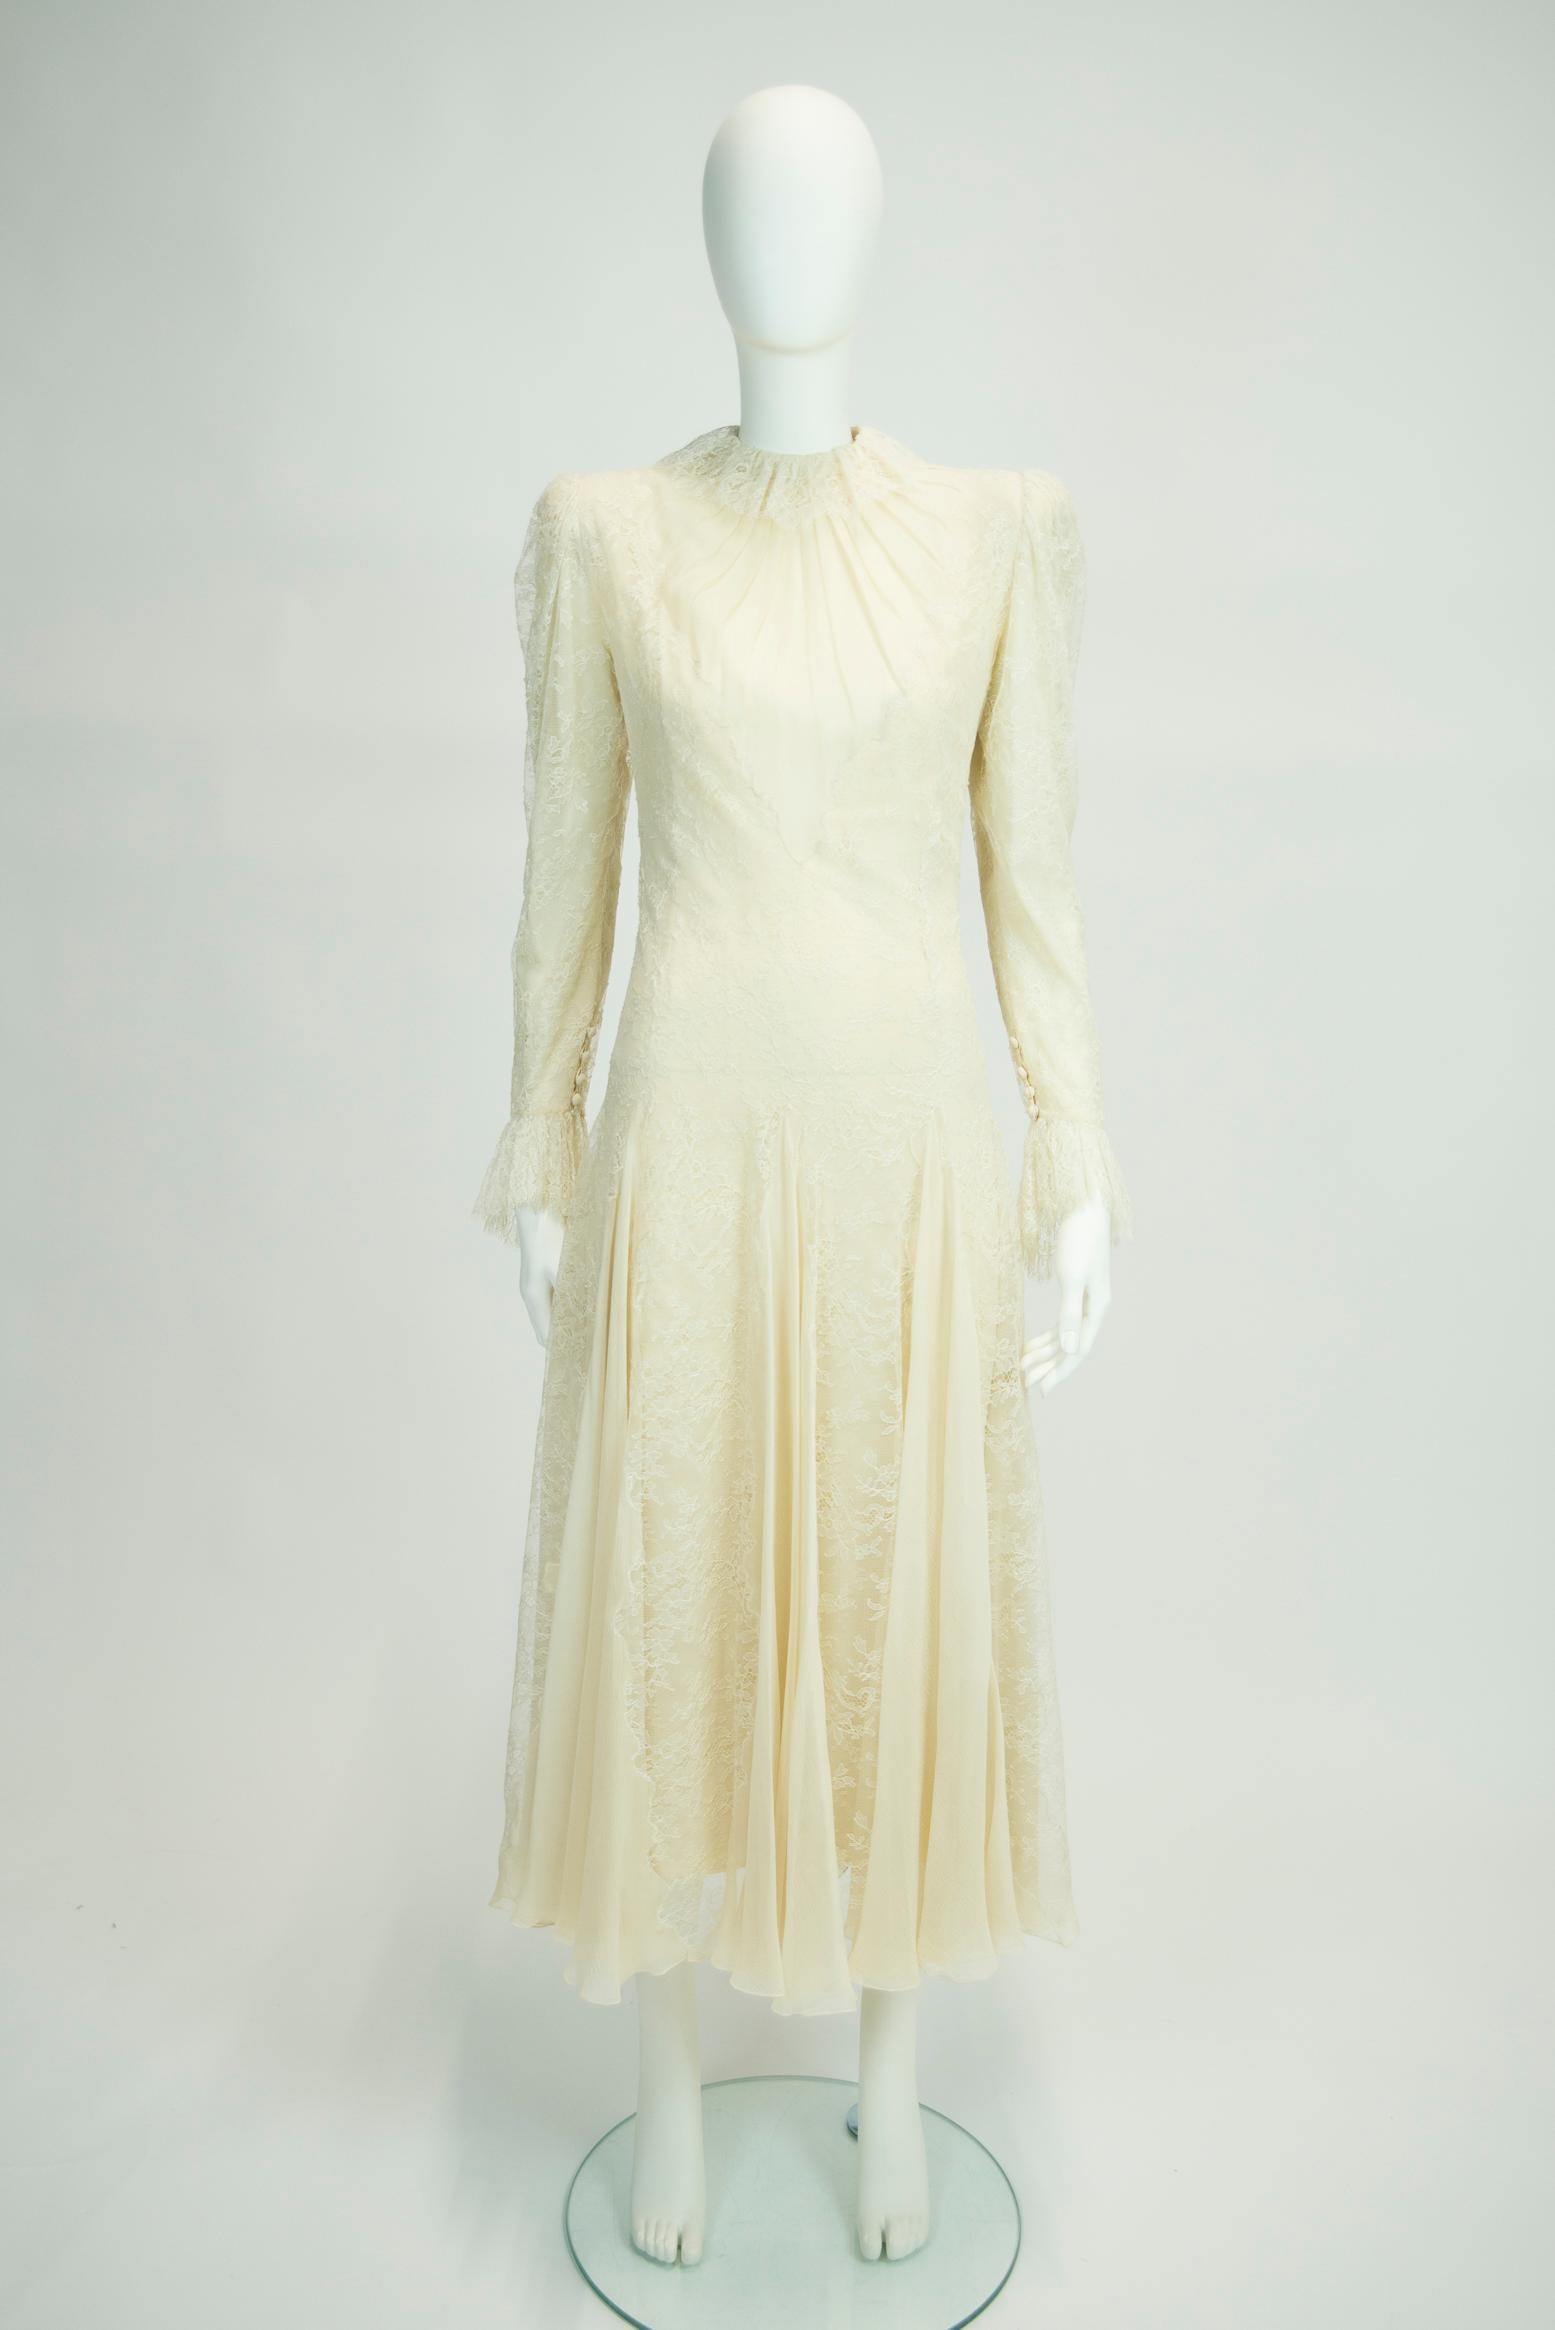 This early 80's Scherrer haute couture dress could be a fabulous option for a bride-to-be. Made from delicate off-white lace which is underpinned with a refined color matching silk-chiffon to reduce the transparency, this dress features fine godet